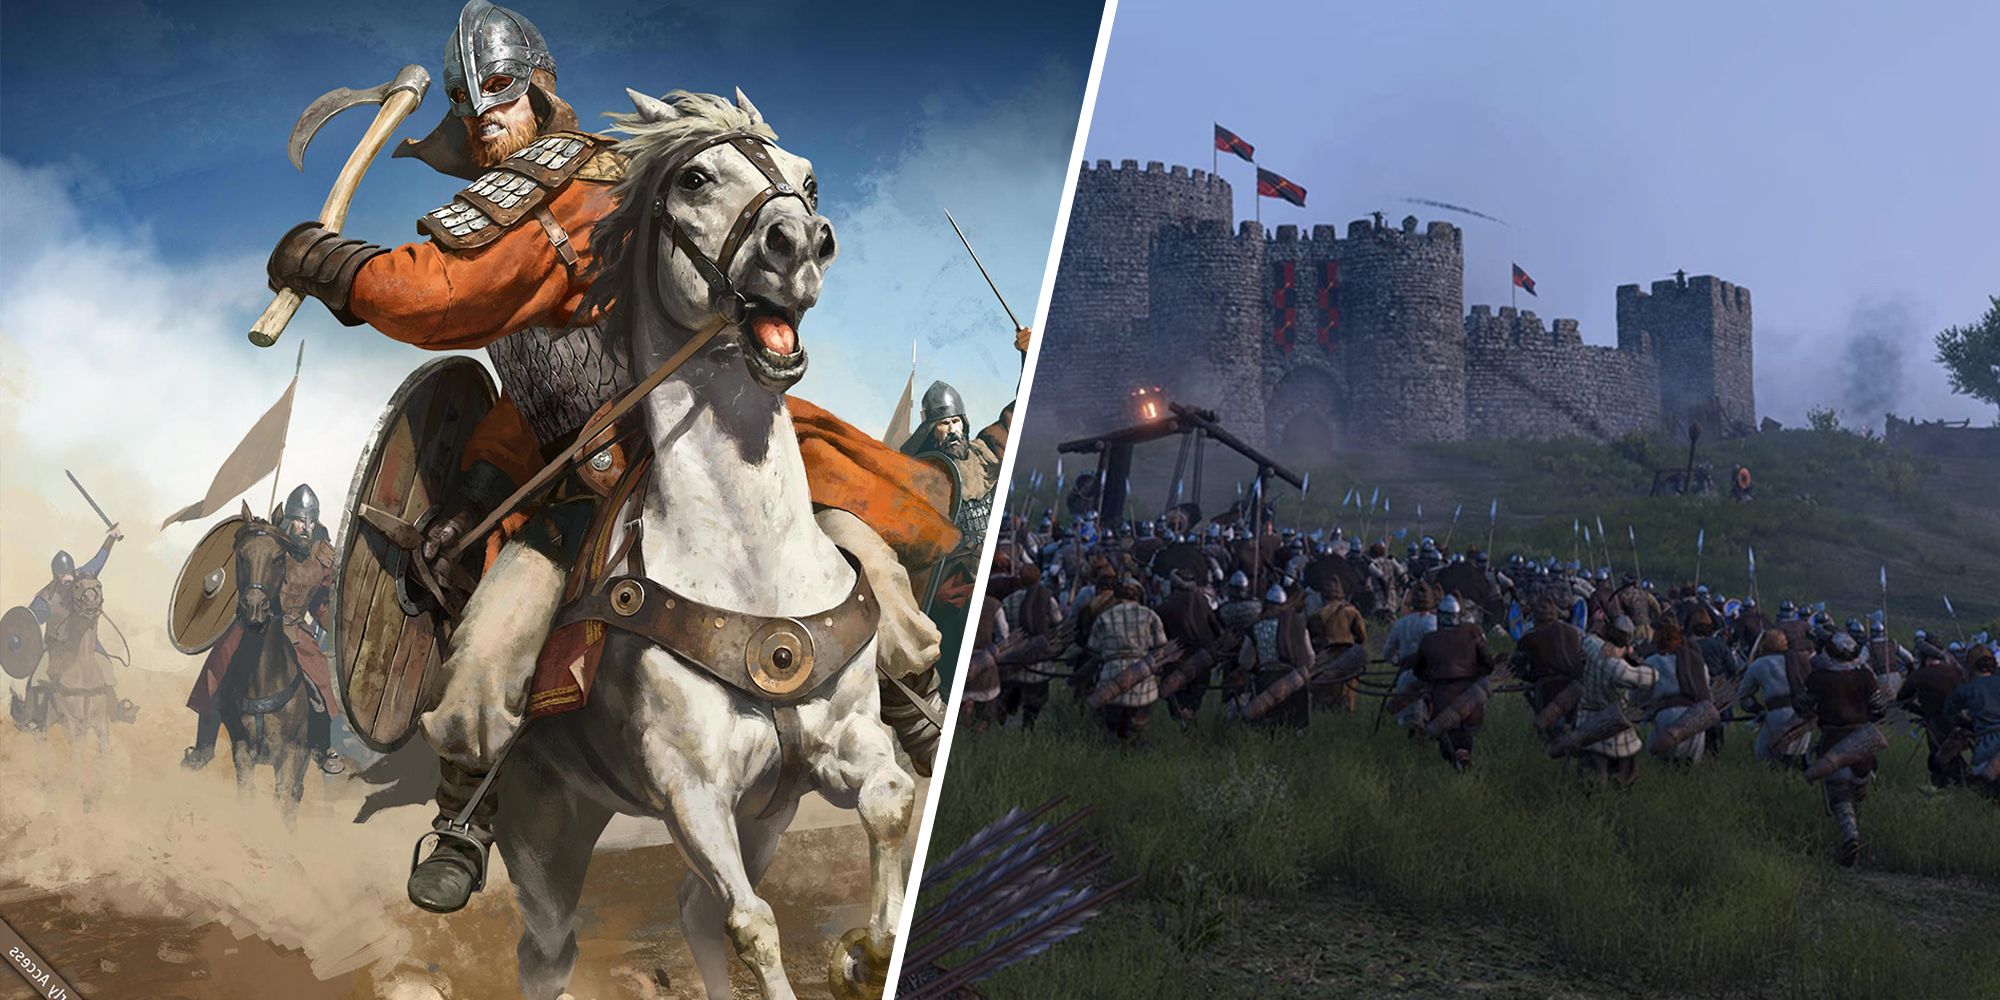 Split image of a soldier on a white horse and a siege battle